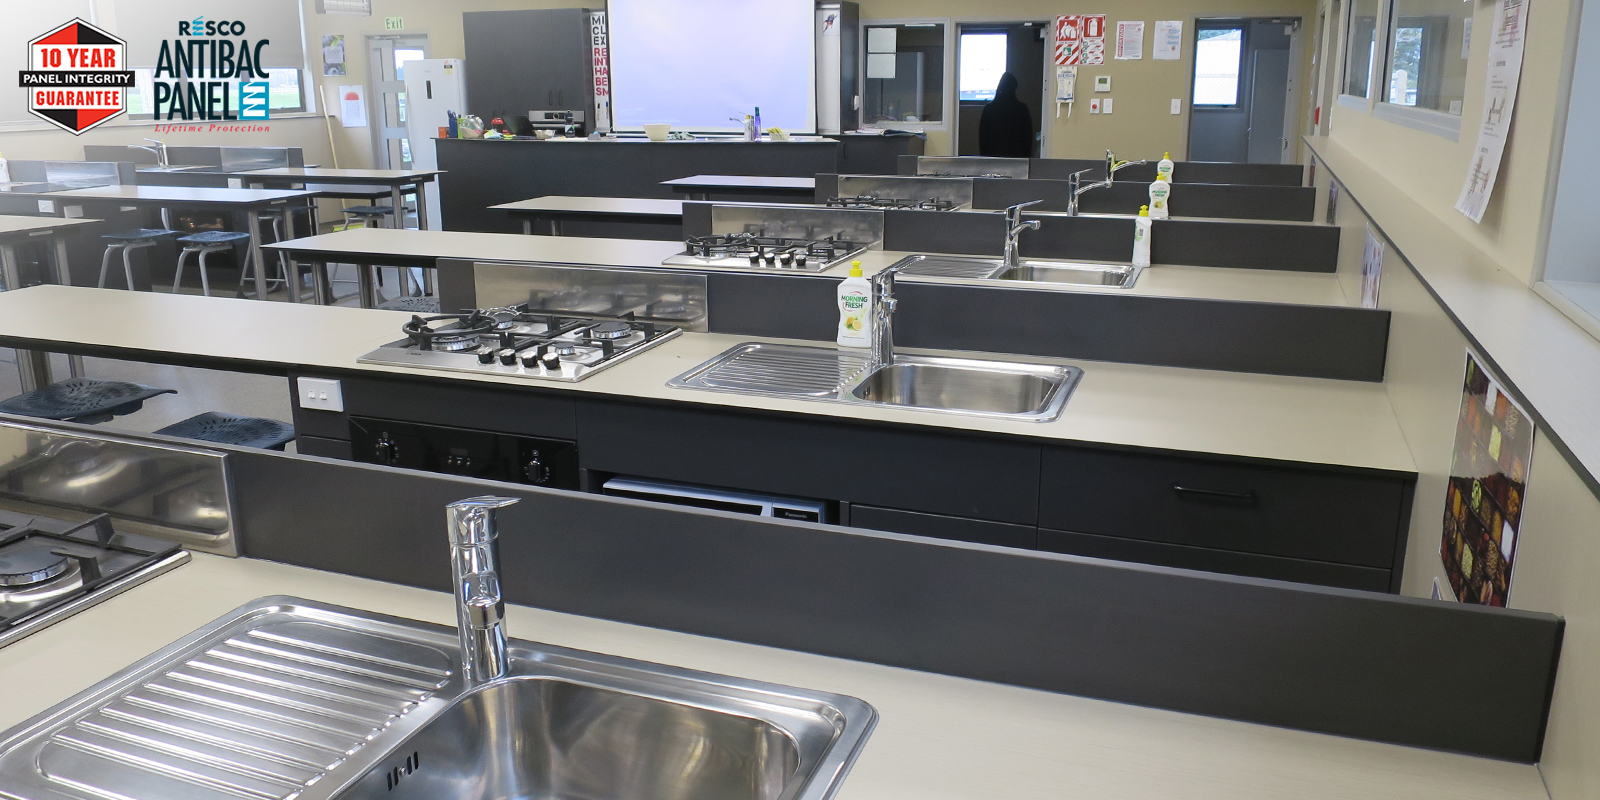 High school opts for Resco Compact Laminate panels for hardy, hygenic benchtops in food tech lab.